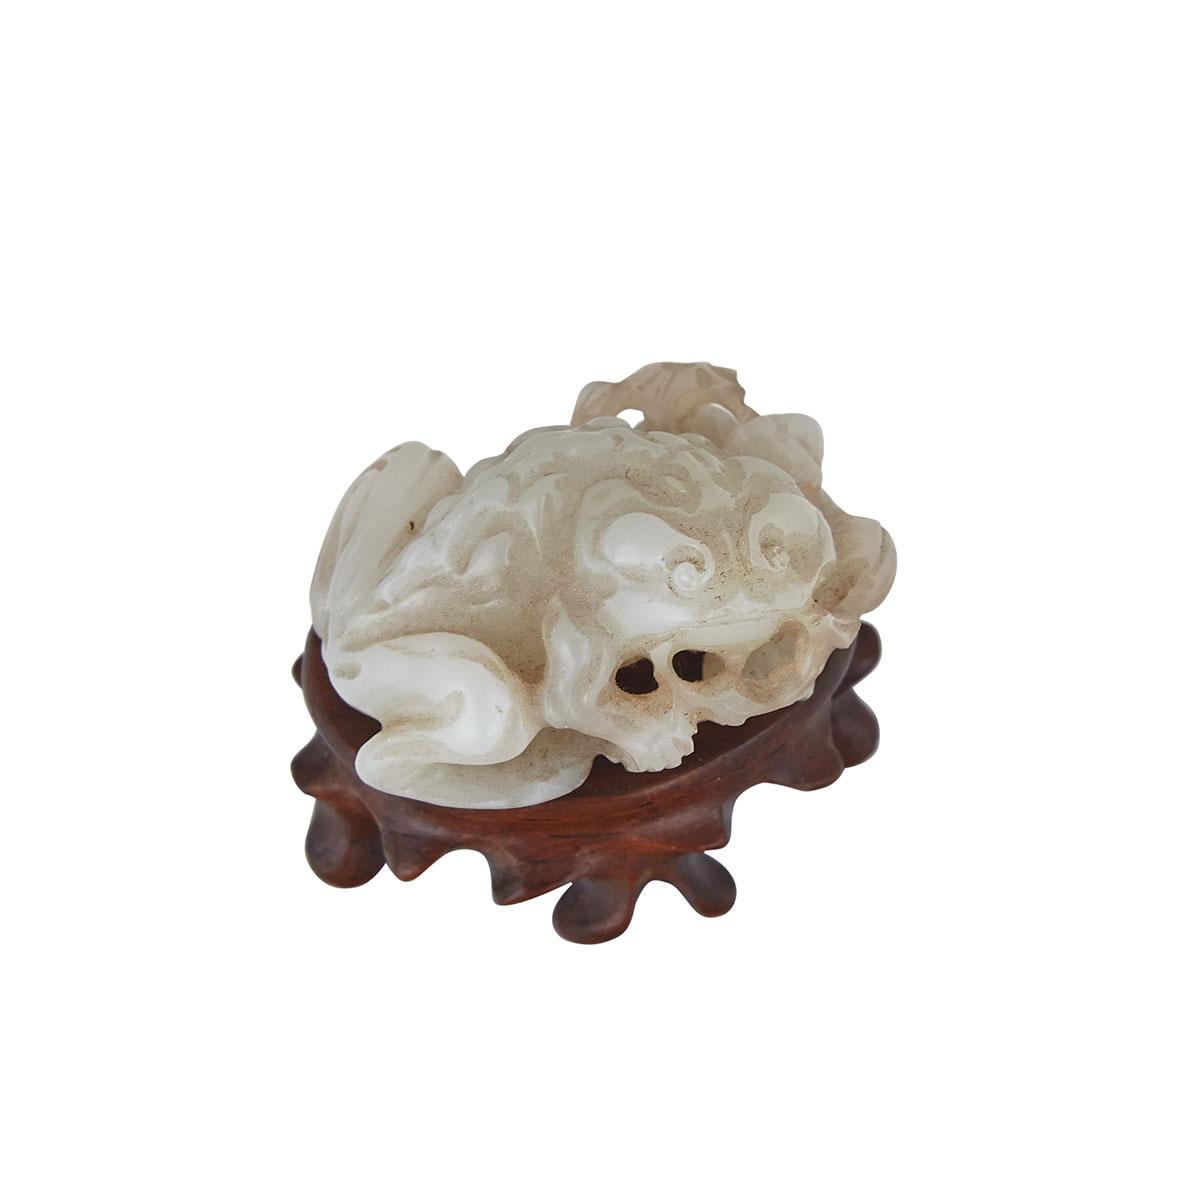 Miniature White Jade Model of a Toad, 19th Century